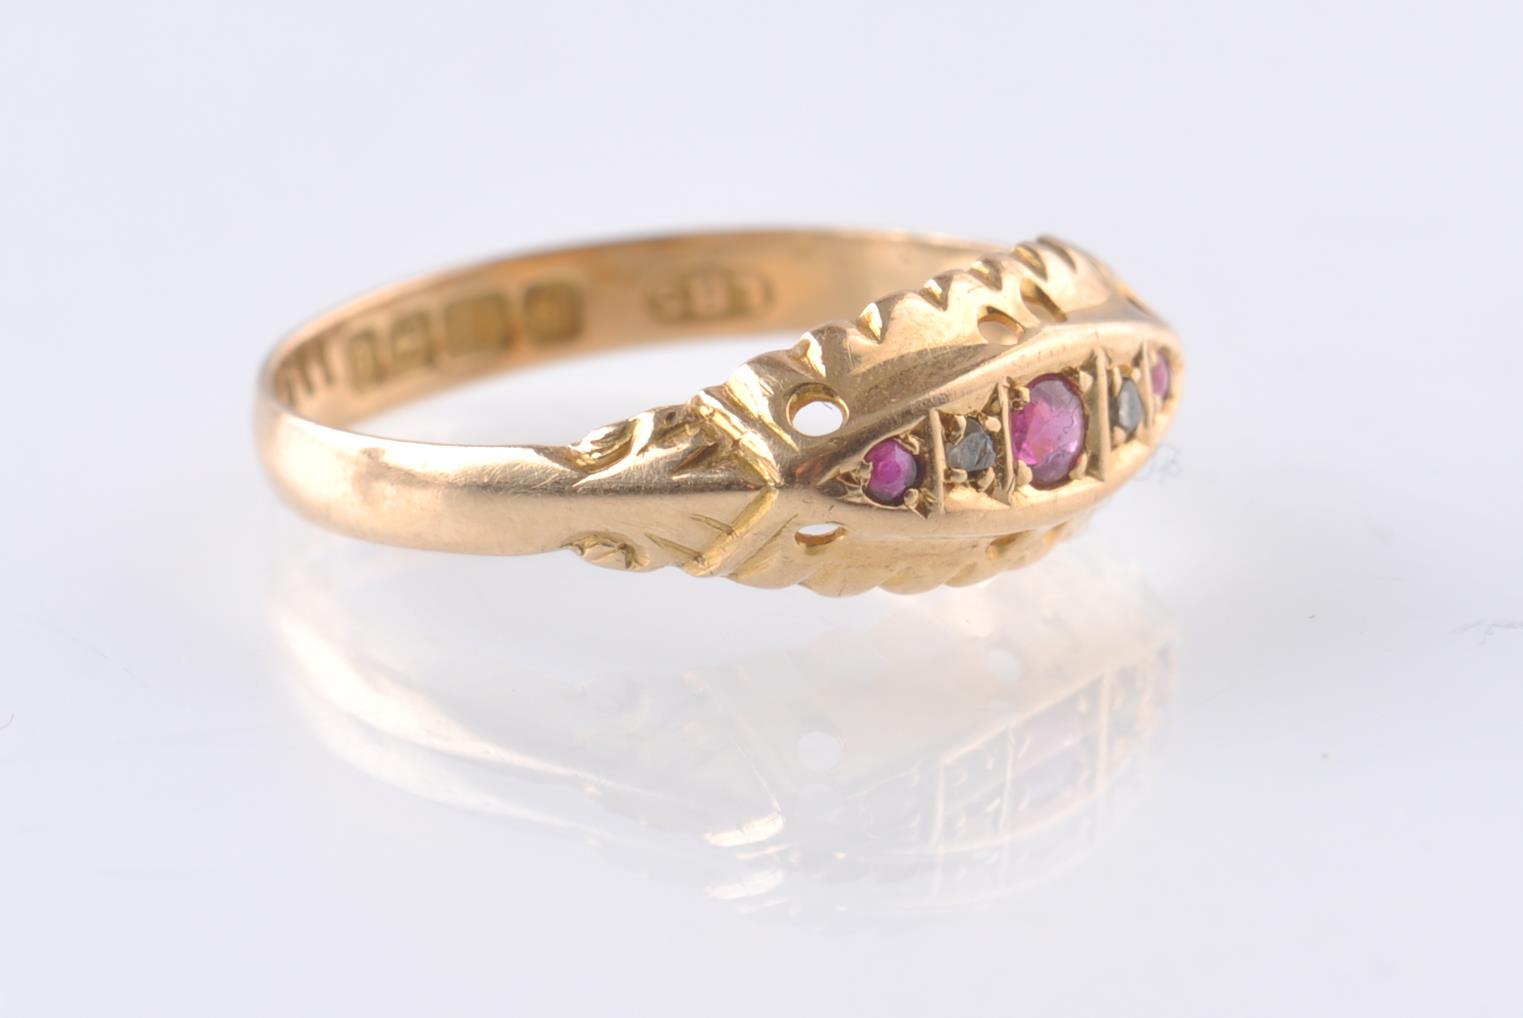 AN EARLY 20TH CENTURY 18CT GOLD RING SET WITH 3 ROUND CUT RUBIES - Image 2 of 4